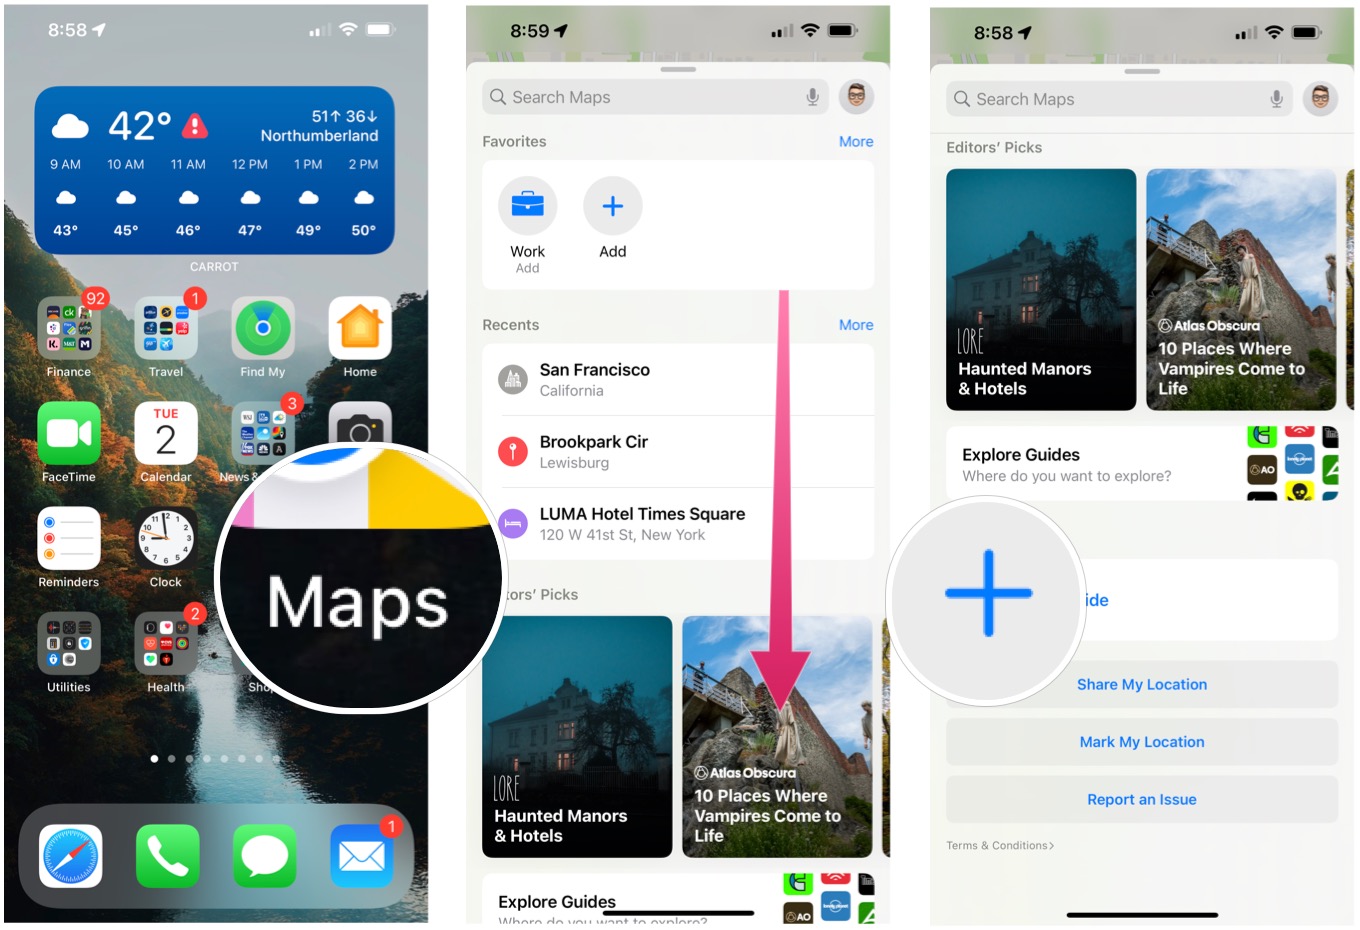 To create guides in the Maps app, tap on the Maps app then scroll down and choose the + on the left of New Guide under the My Guides section.